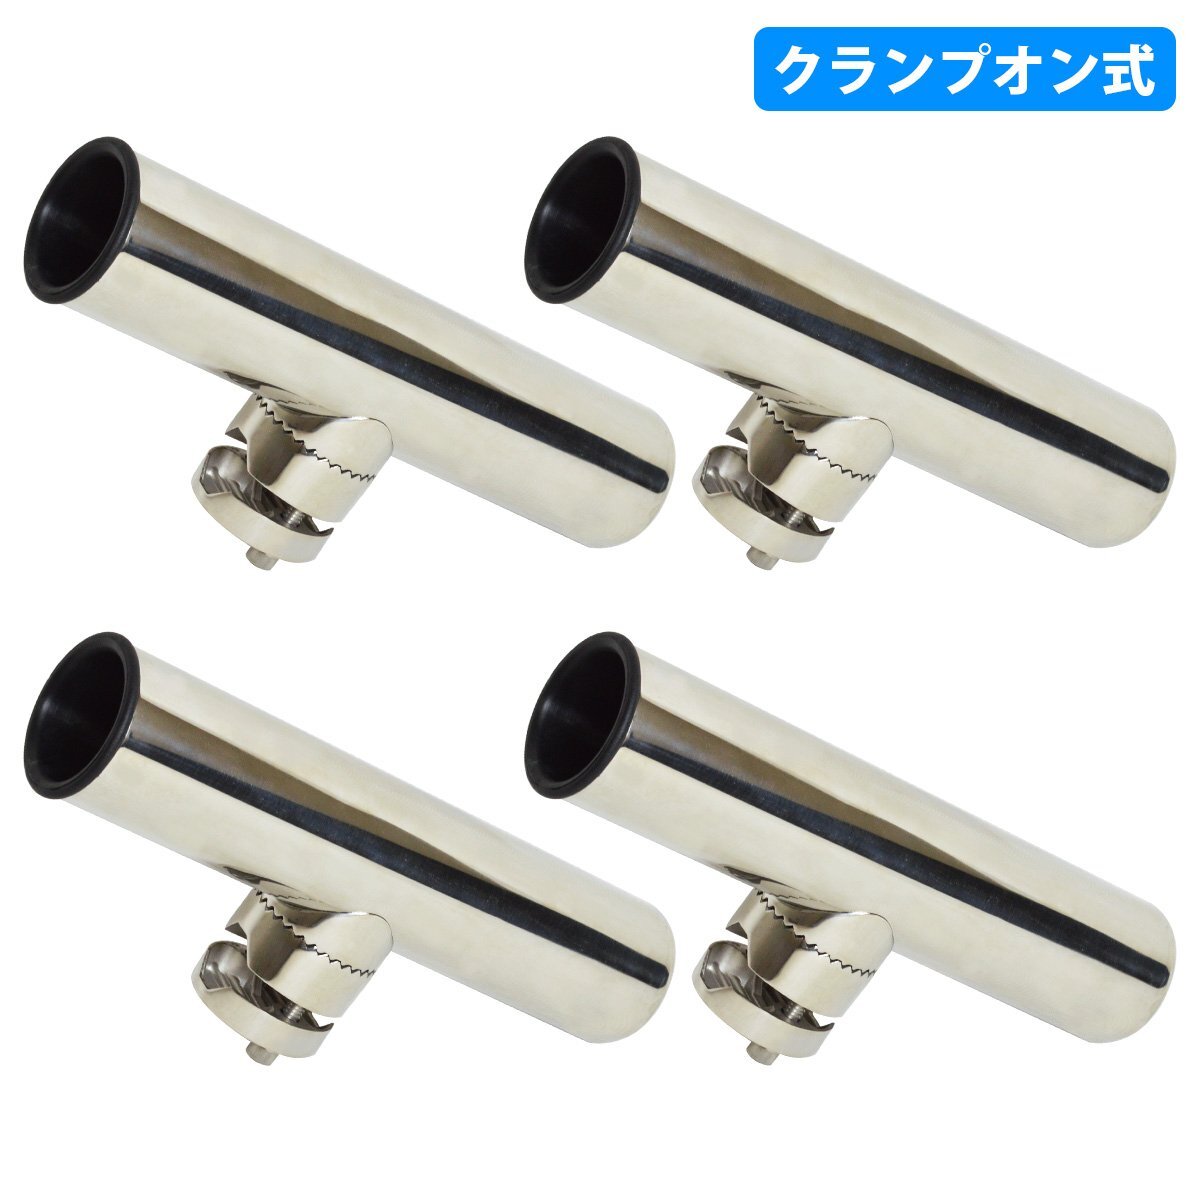 [ free shipping ]4 piece set [ clamp on ] made of stainless steel rod holder angle adjustment possibility boat boat fishing holder rod put sea river fishing 